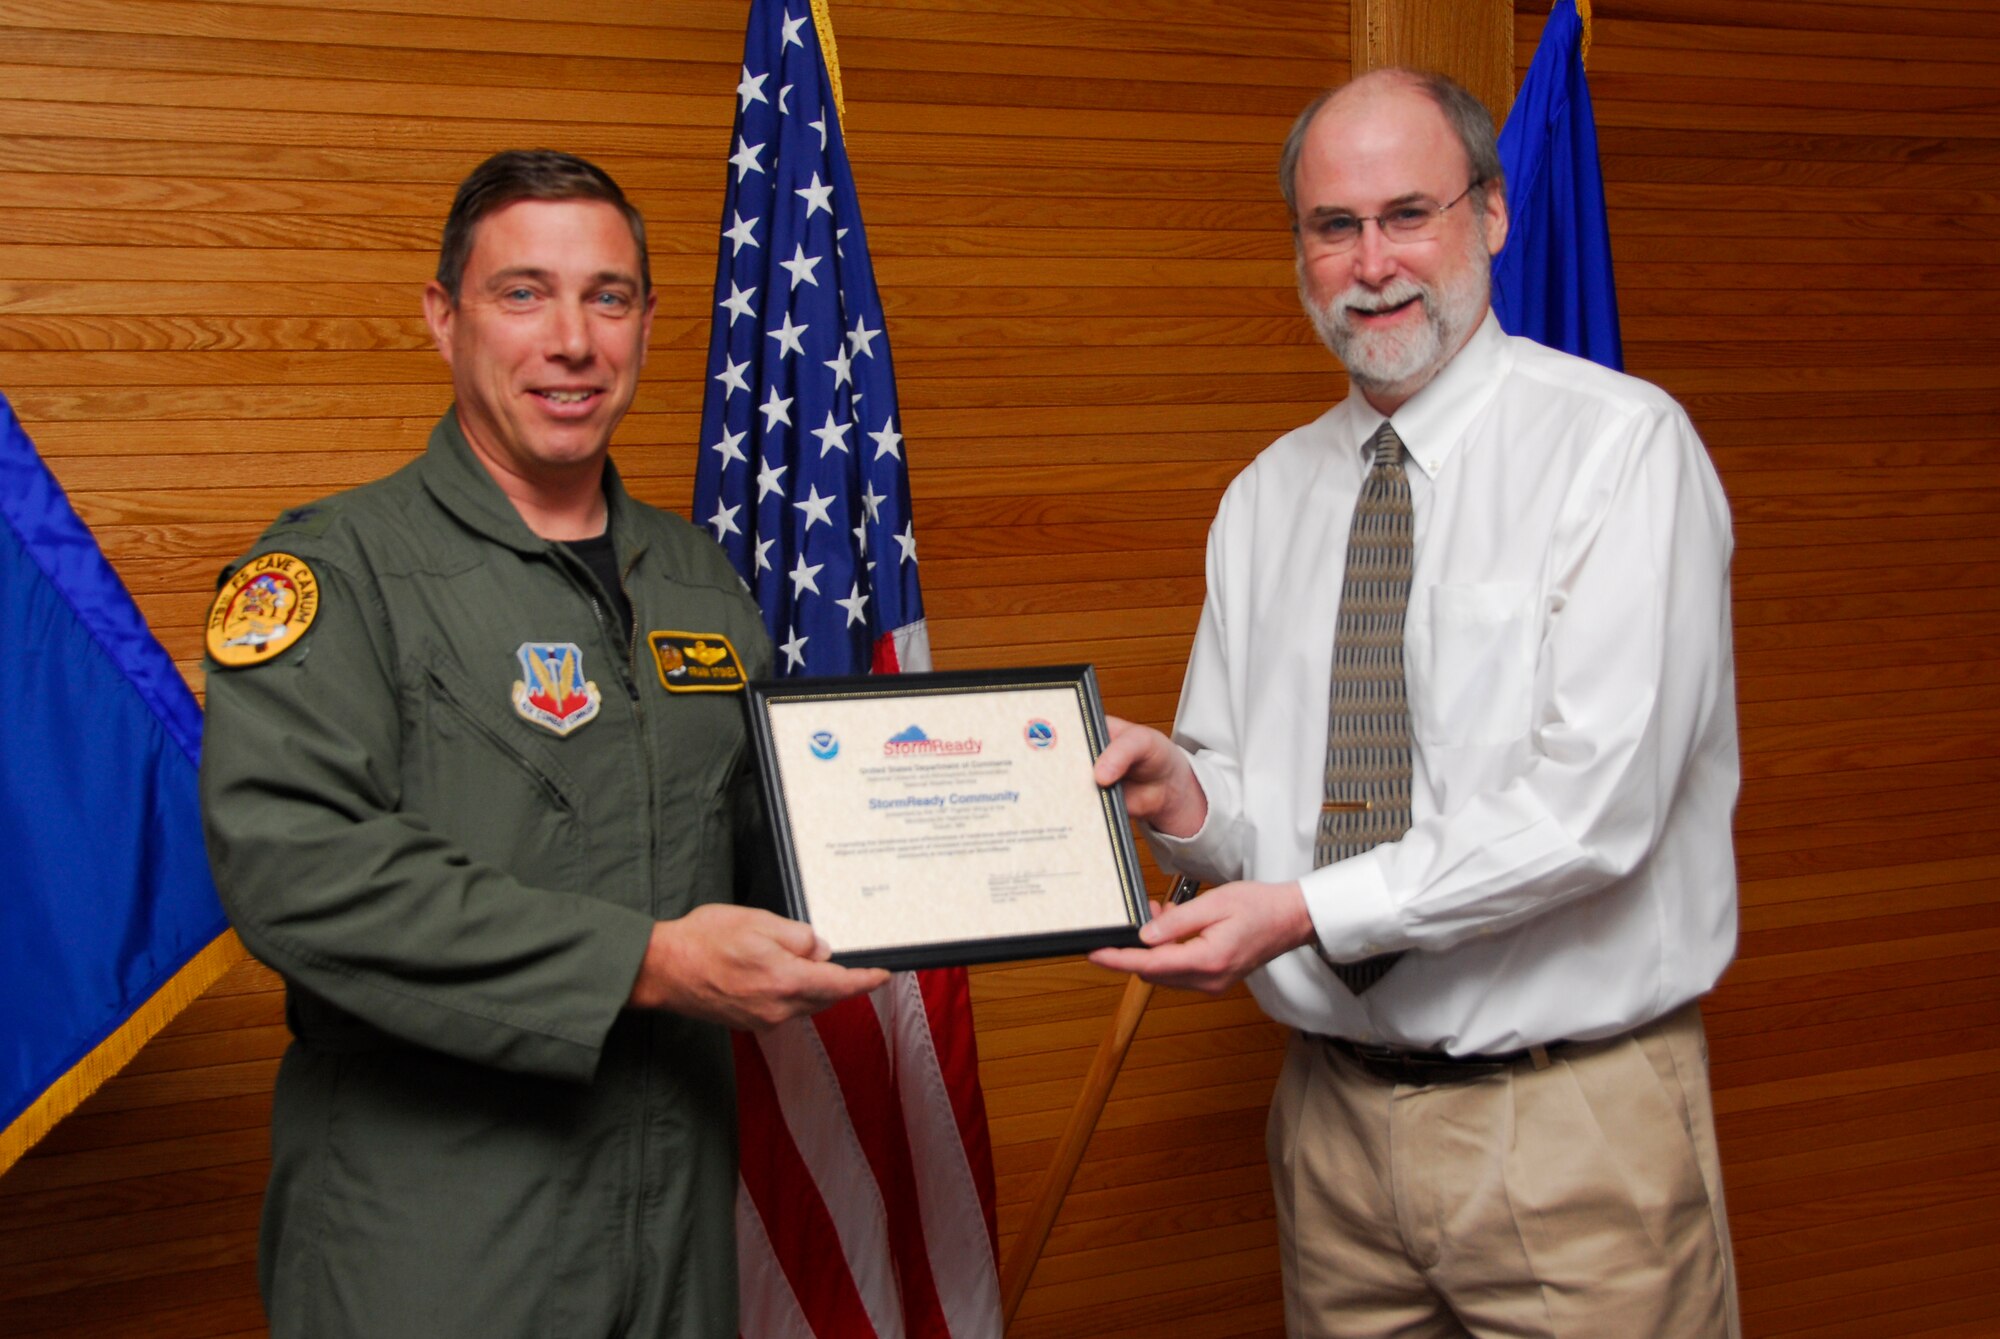 Mr. Michael R. Stewart, meteorologist in charge of the Duluth, Minn., National Weather Service presents U.S. Air Force Col. Frank Stokes, 148th Fighter Wing Commander, certification of the 148th Fighter Wing as a StormReady Community at the Duluth, Minn., ANG Base May 3, 2010.  The 148th Fighter Wing has become the first National Guard unit to be certified by the National Weather Service as a StormReady Community. (U.S. Air Force photo by Master Sgt. Jason W. Rolfe/Released)